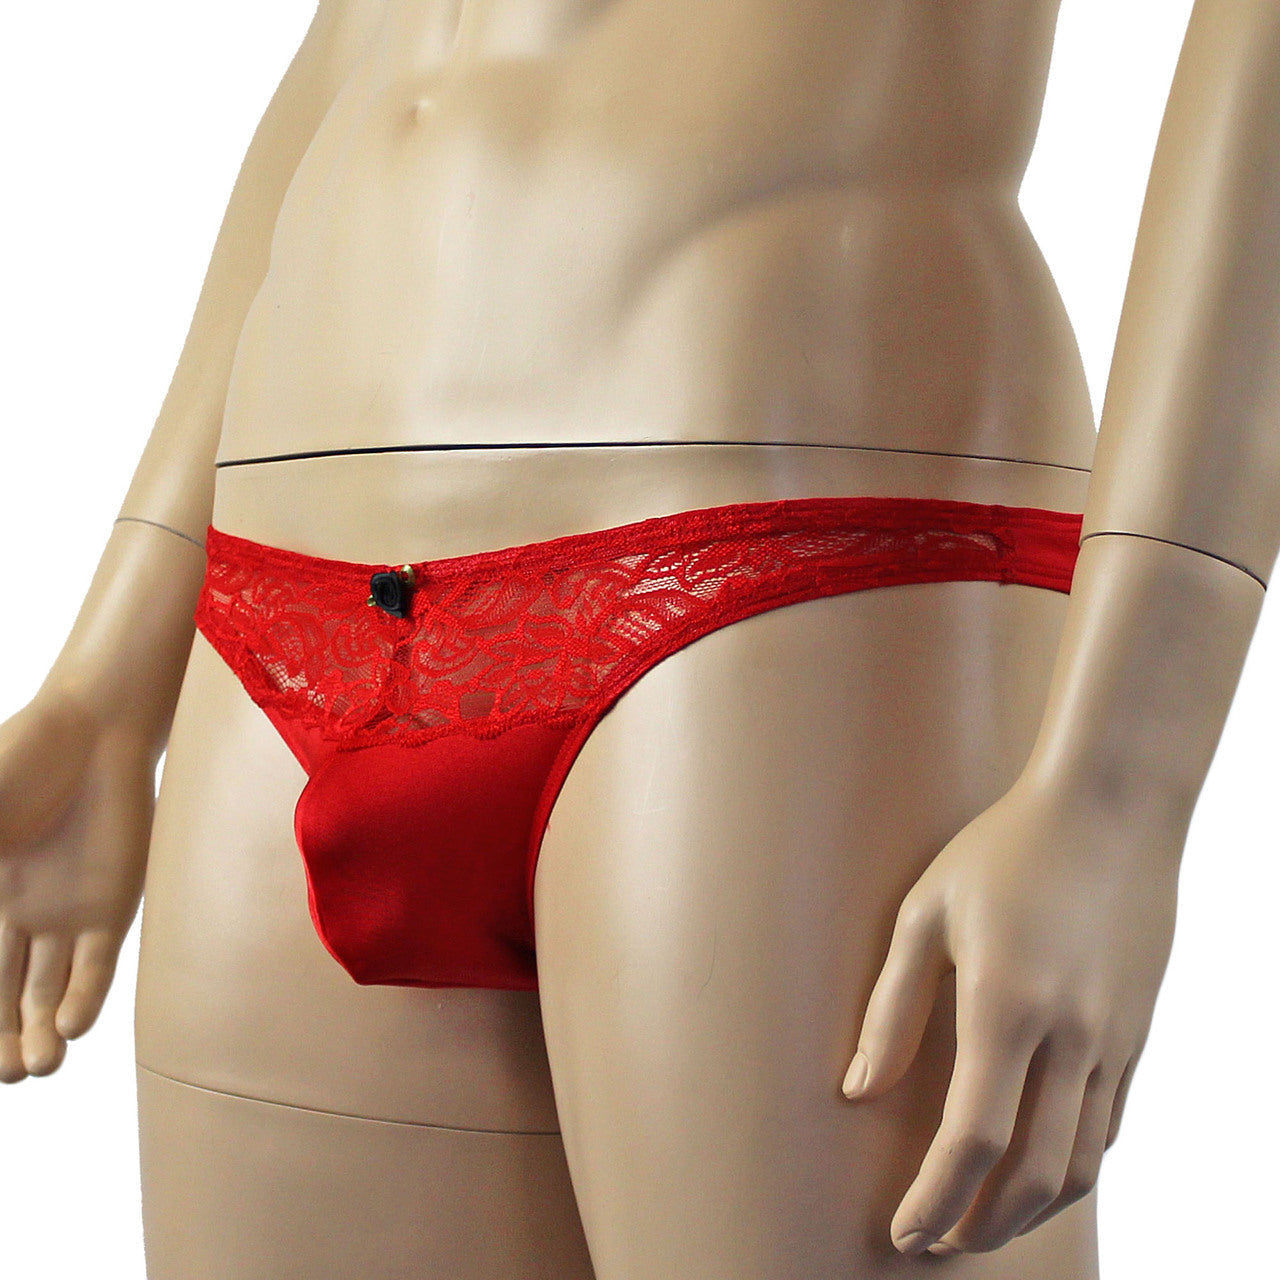 Mens Lingerie Stretch Lycra Capri Bikini with Lace (red plus other colours)